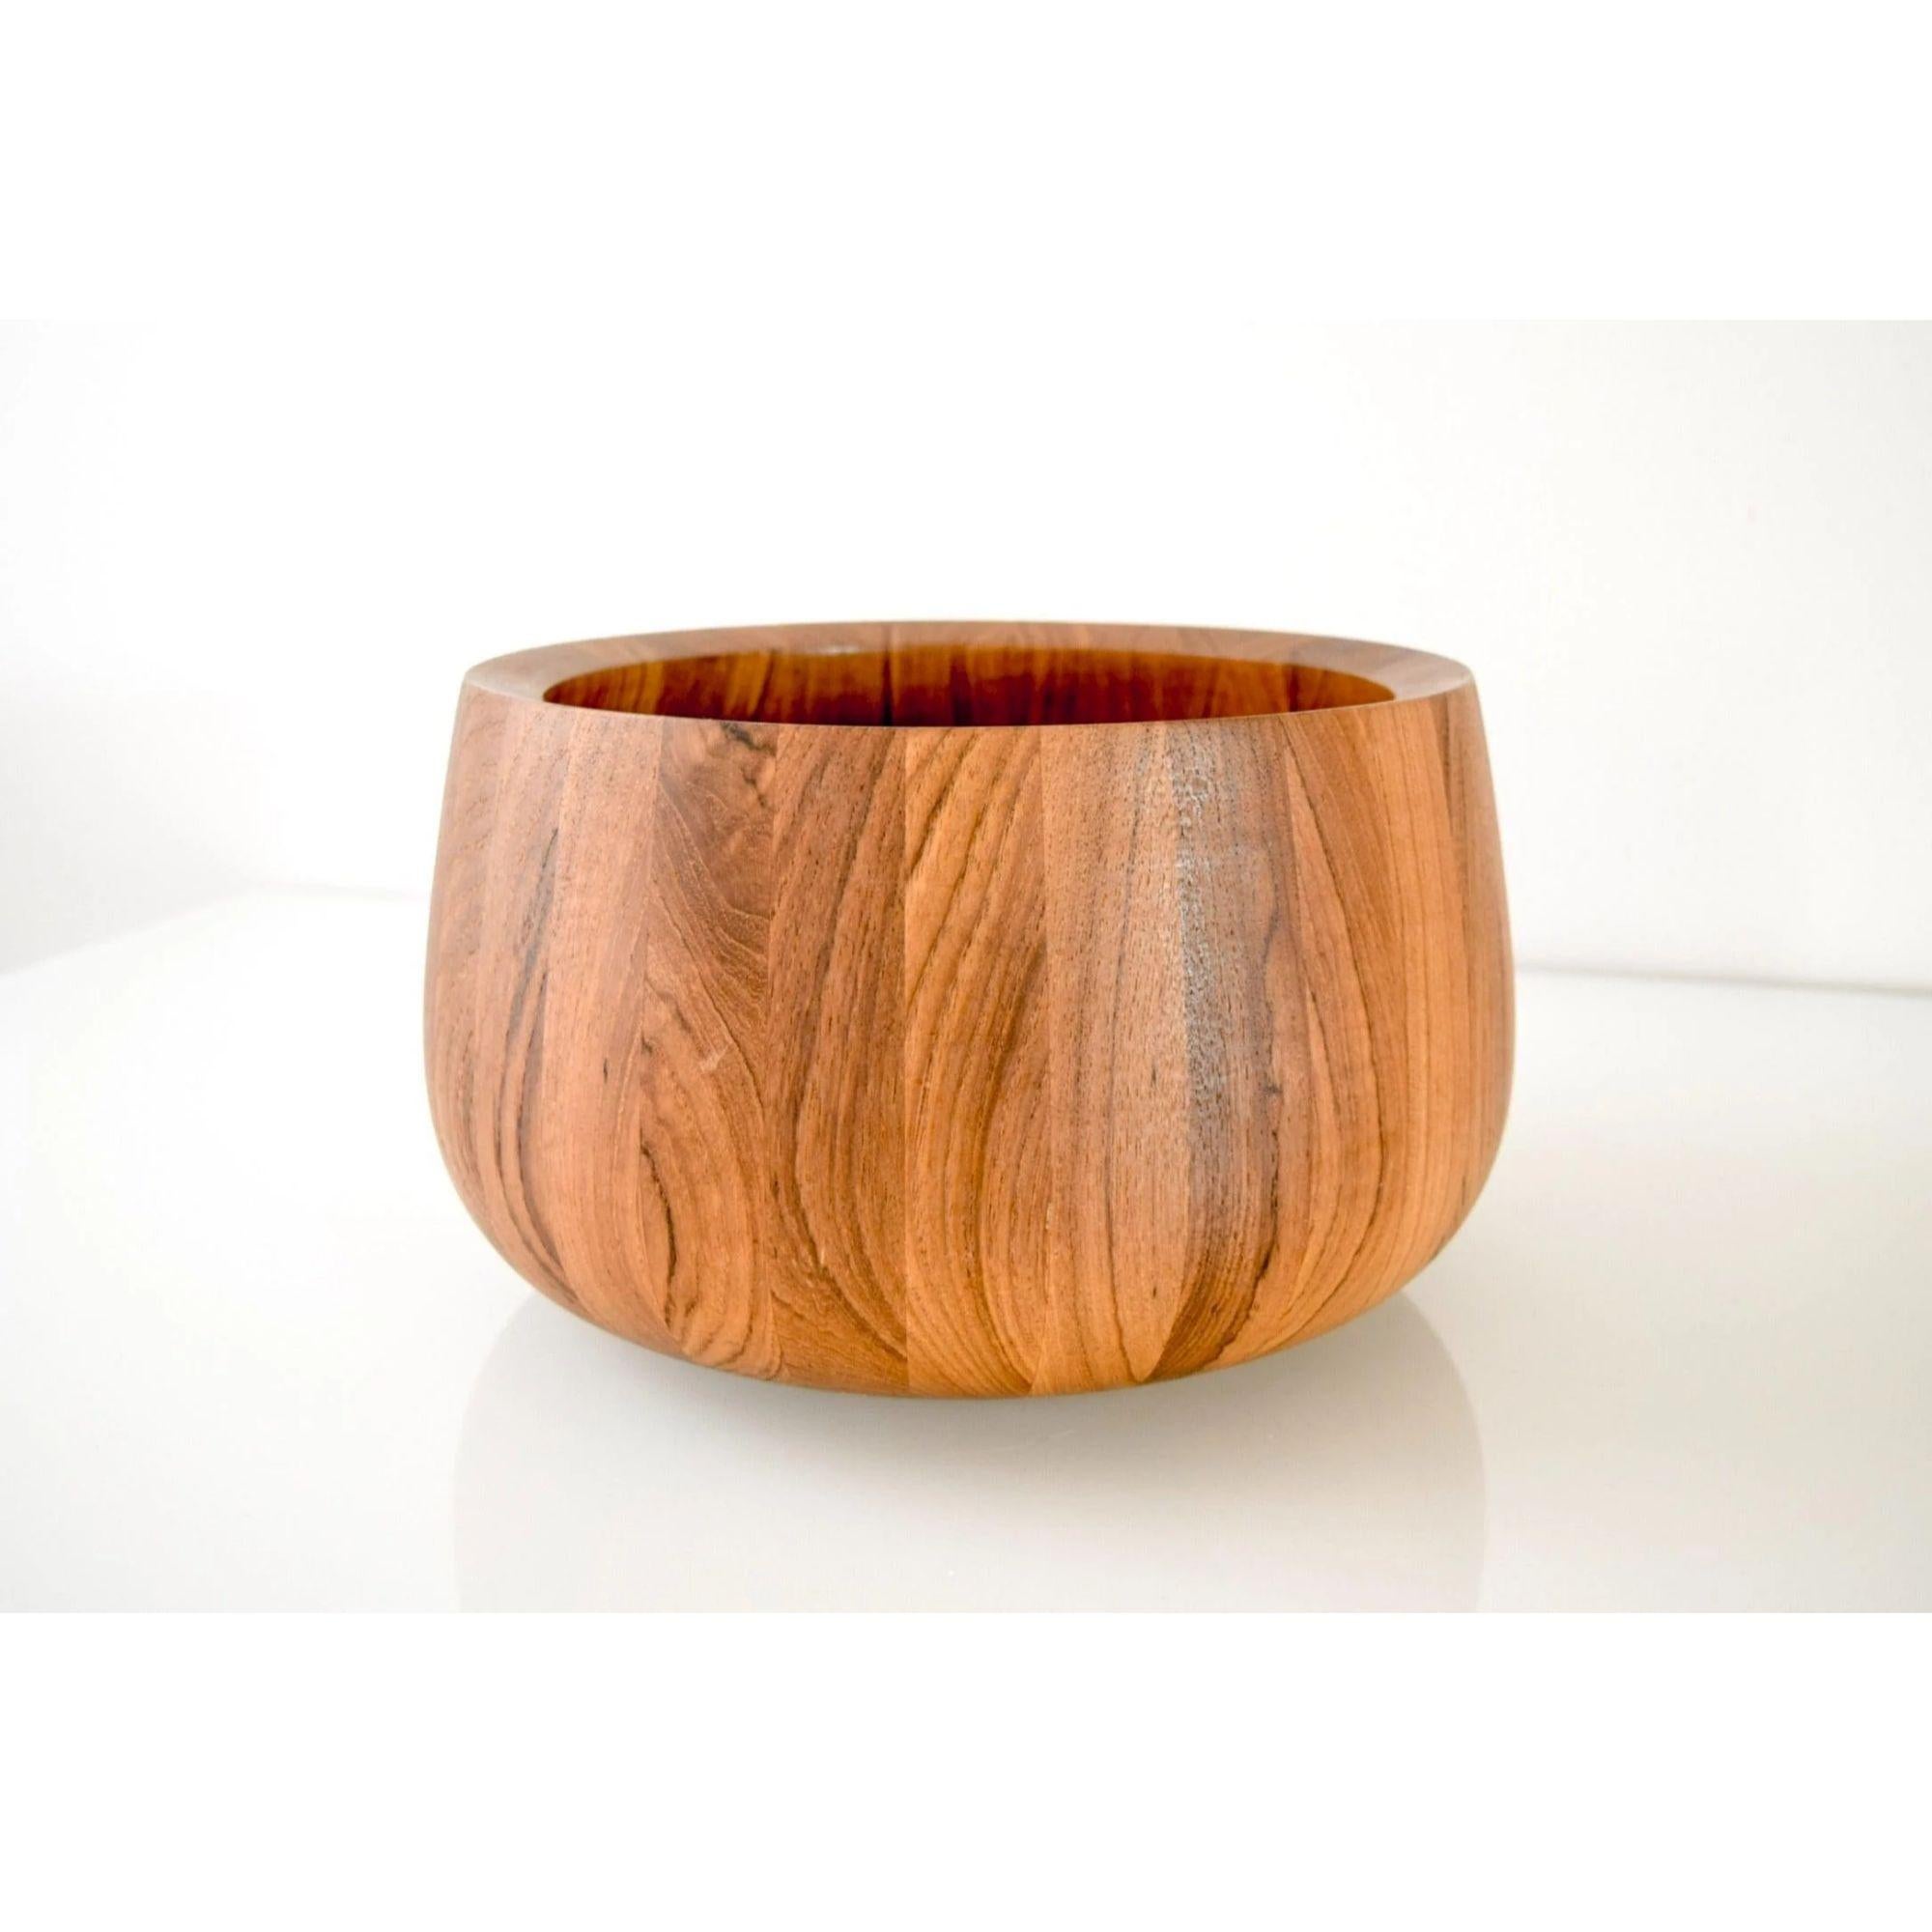 This large vintage mid-century Danish modern Dansk teak wood fruit or salad bowl is circa 1960. It is made from thick solid staved teak wood with gorgeous grain and features a simple, elegant design with tall sides that angle in slightly to create a